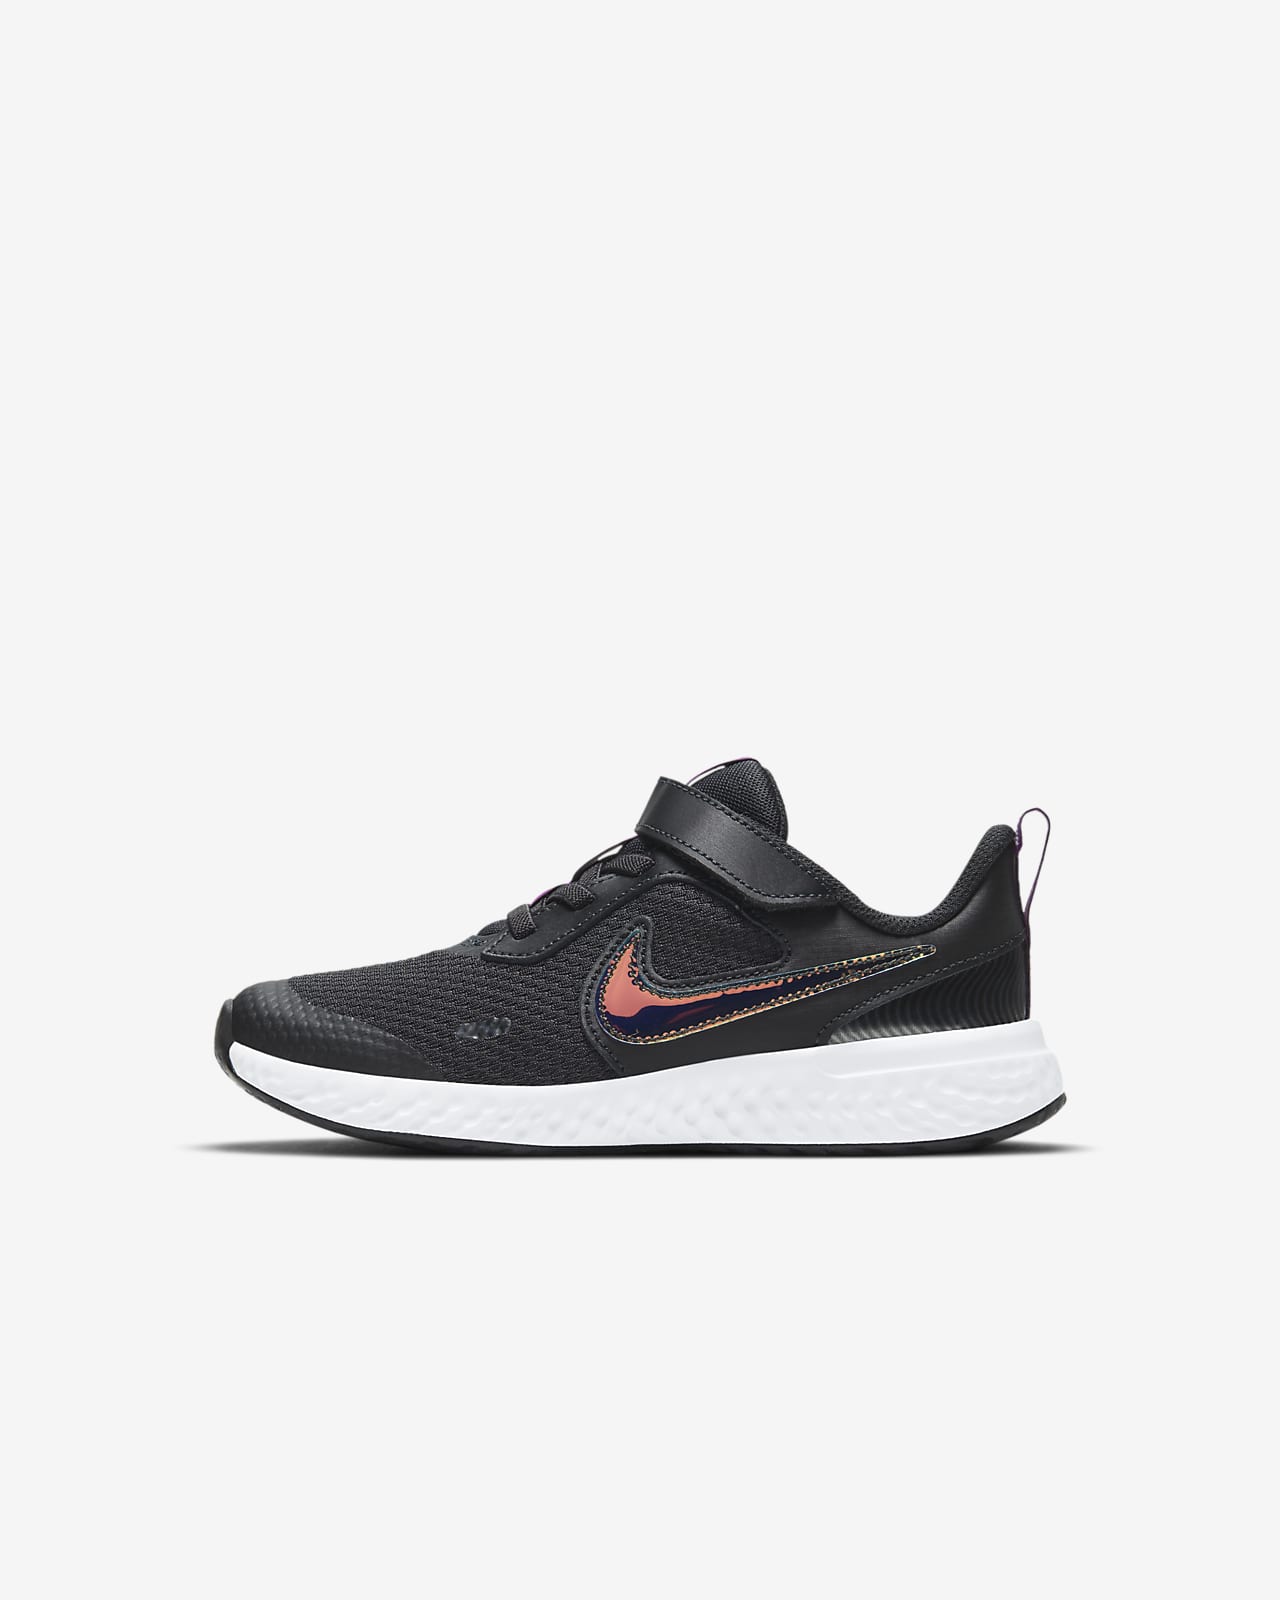 nike younger kids size guide